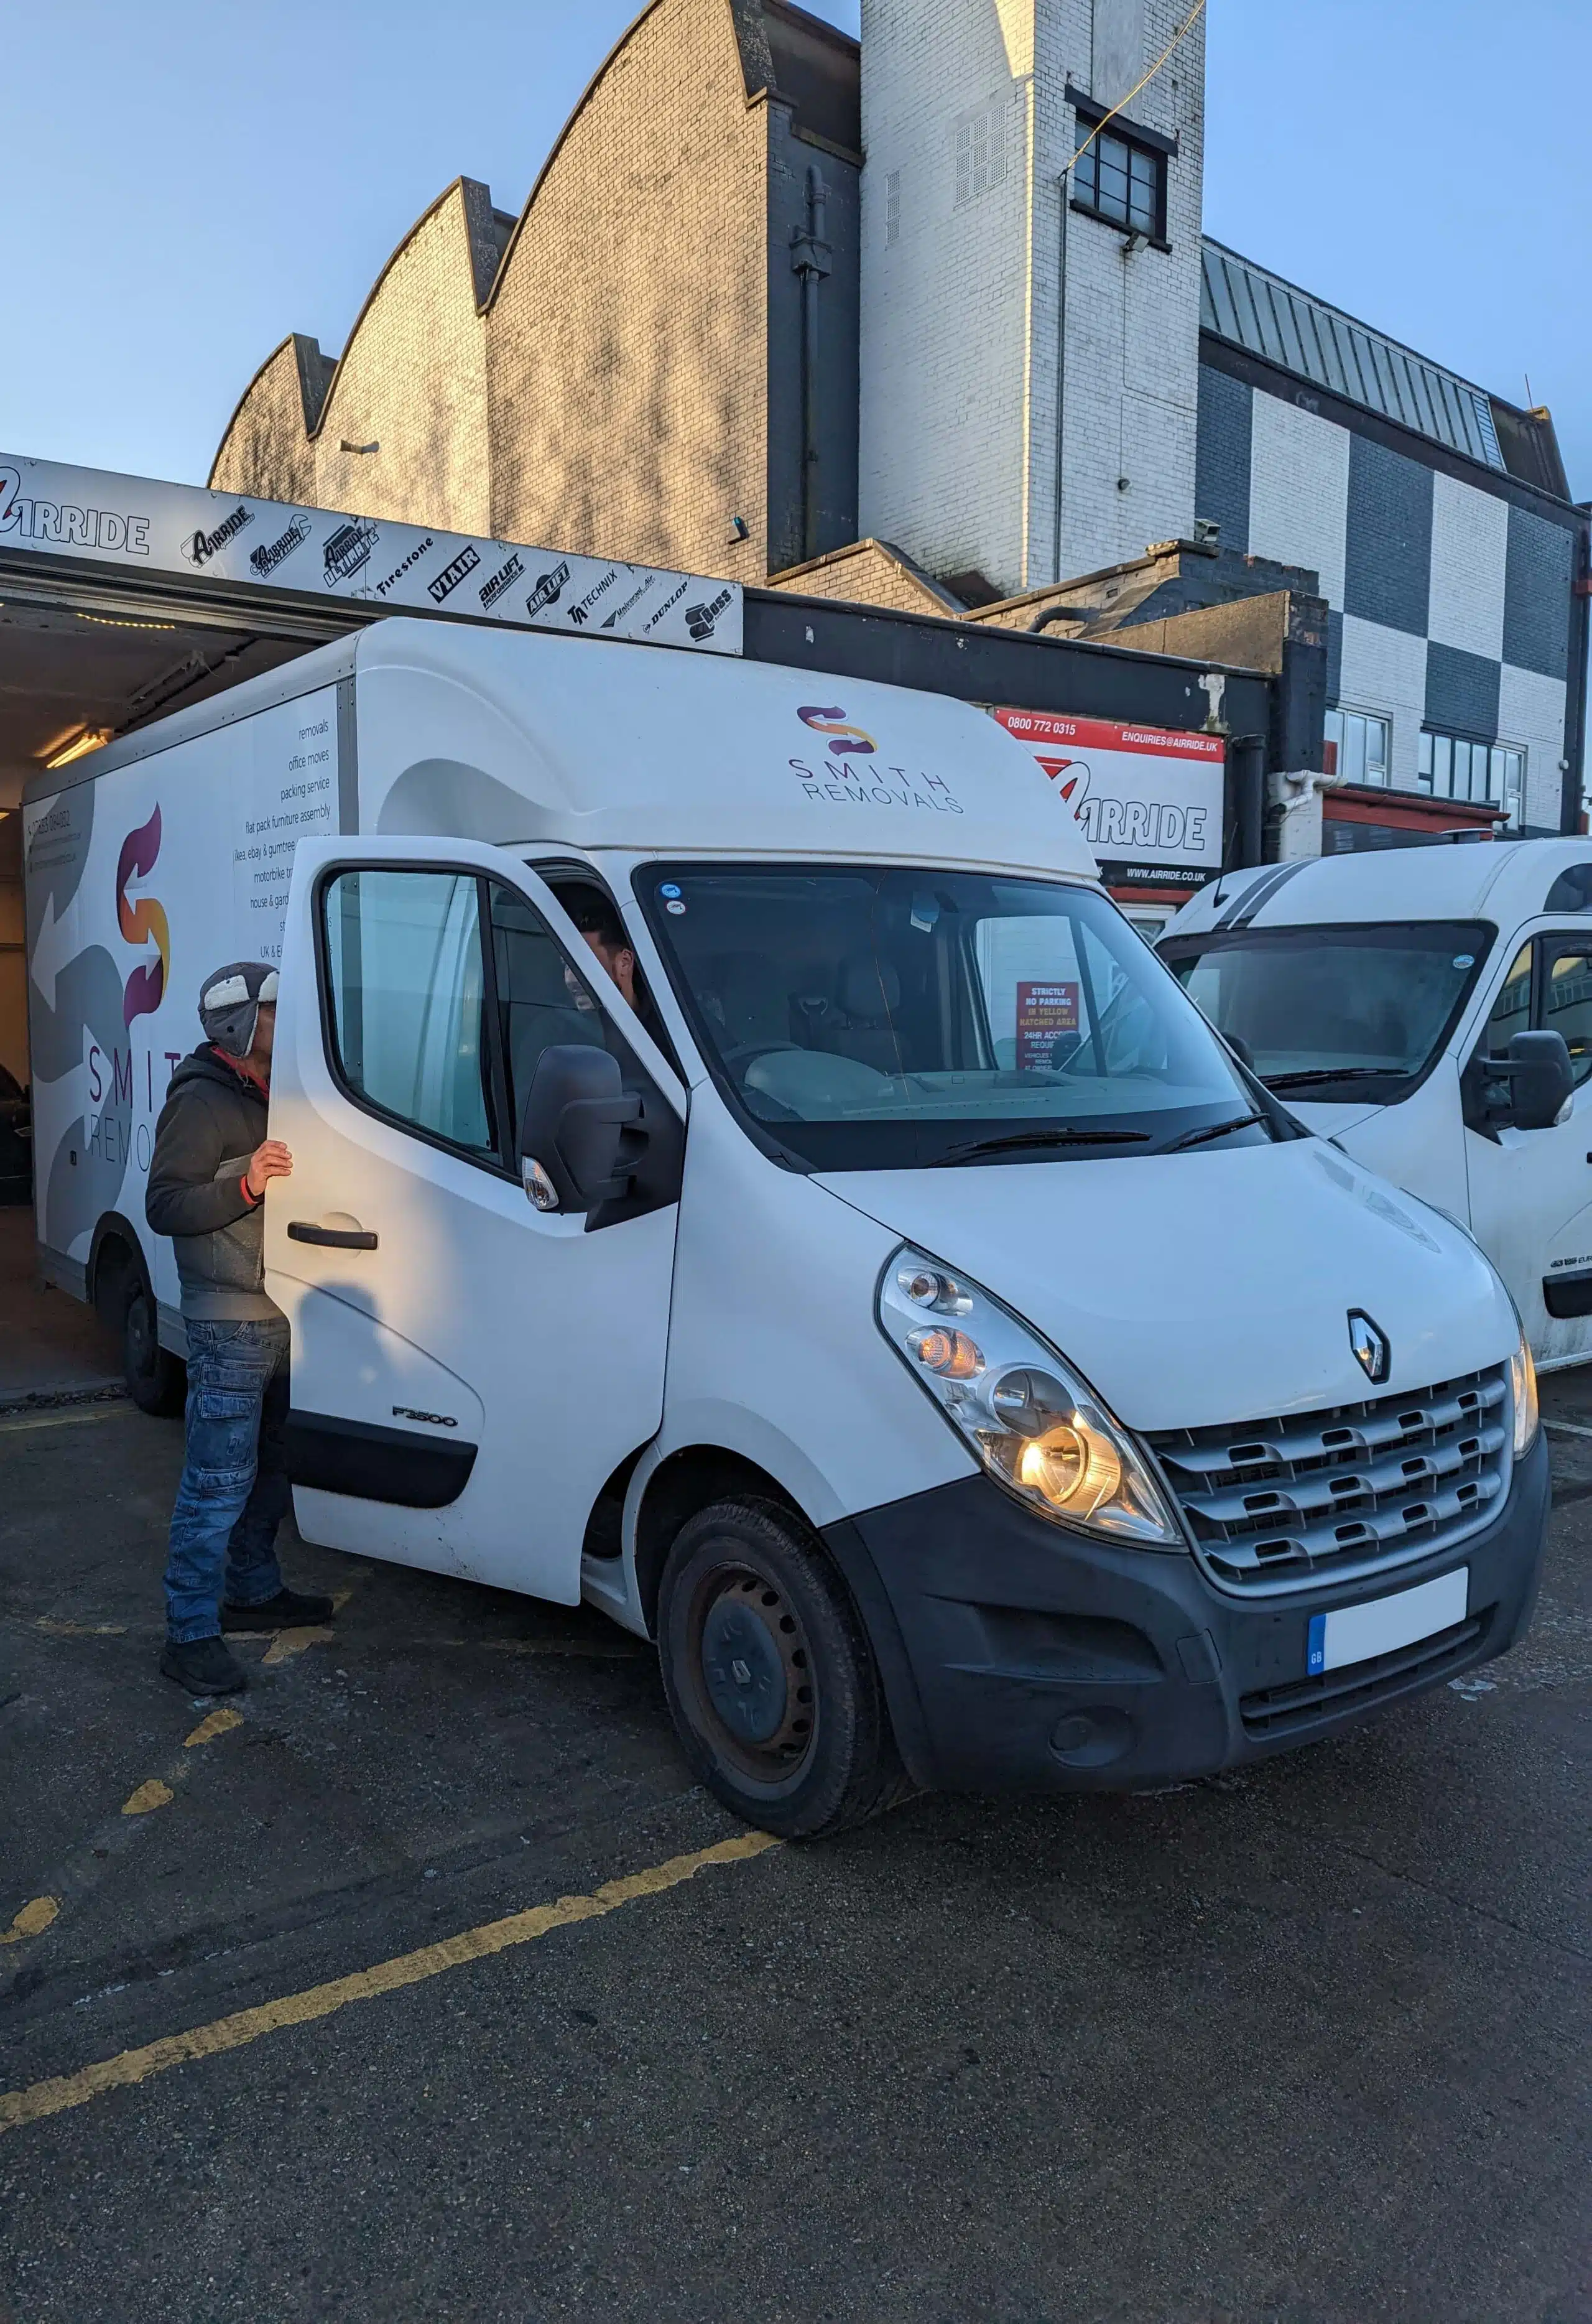 Smith Removals Renault Master parked outside AirRide with staff of both companies chatting